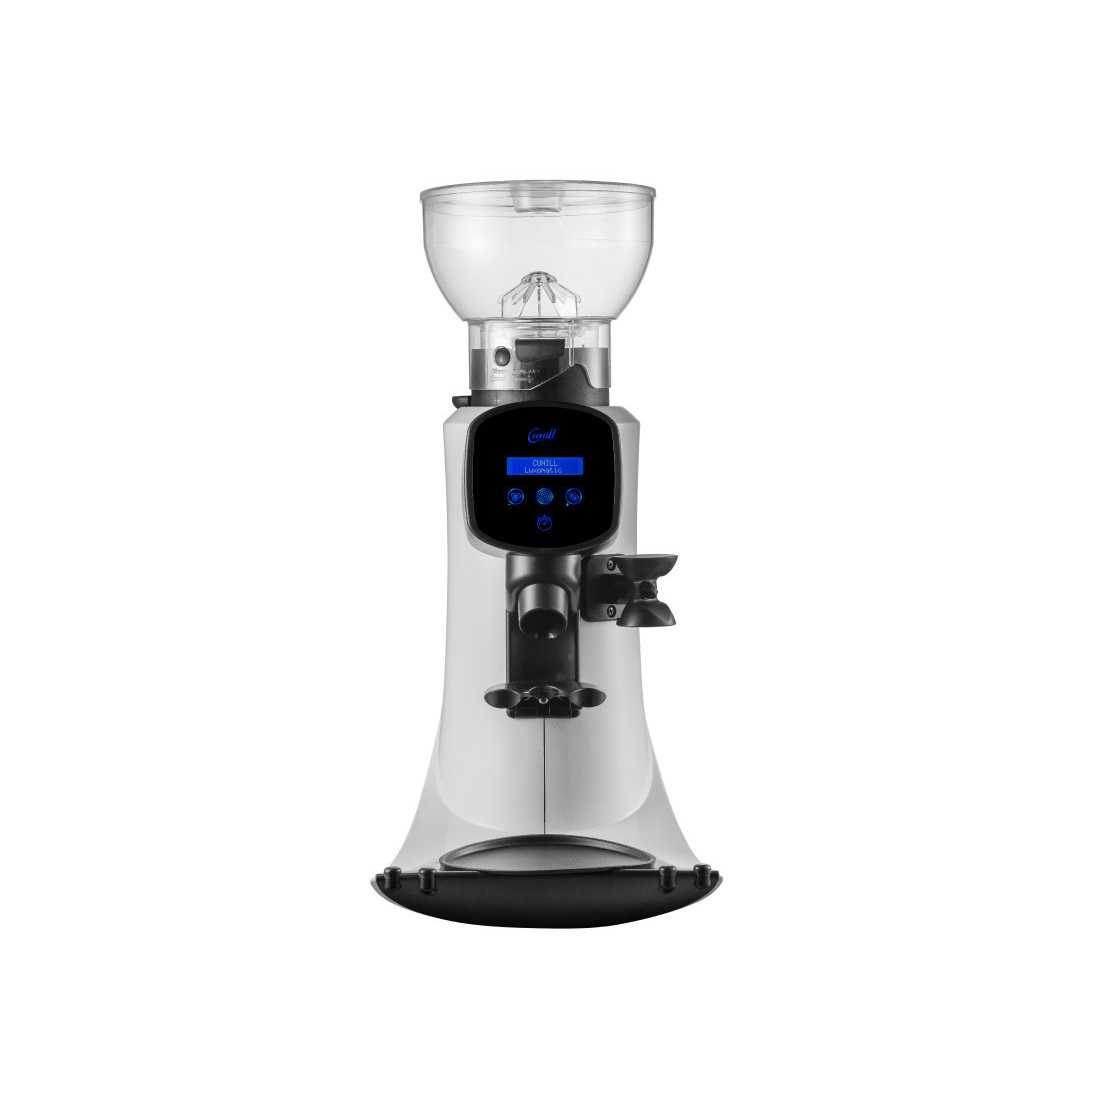 Cunill Luxomatic Automatic On Demand Coffee Grinder|mkayn|مكاين